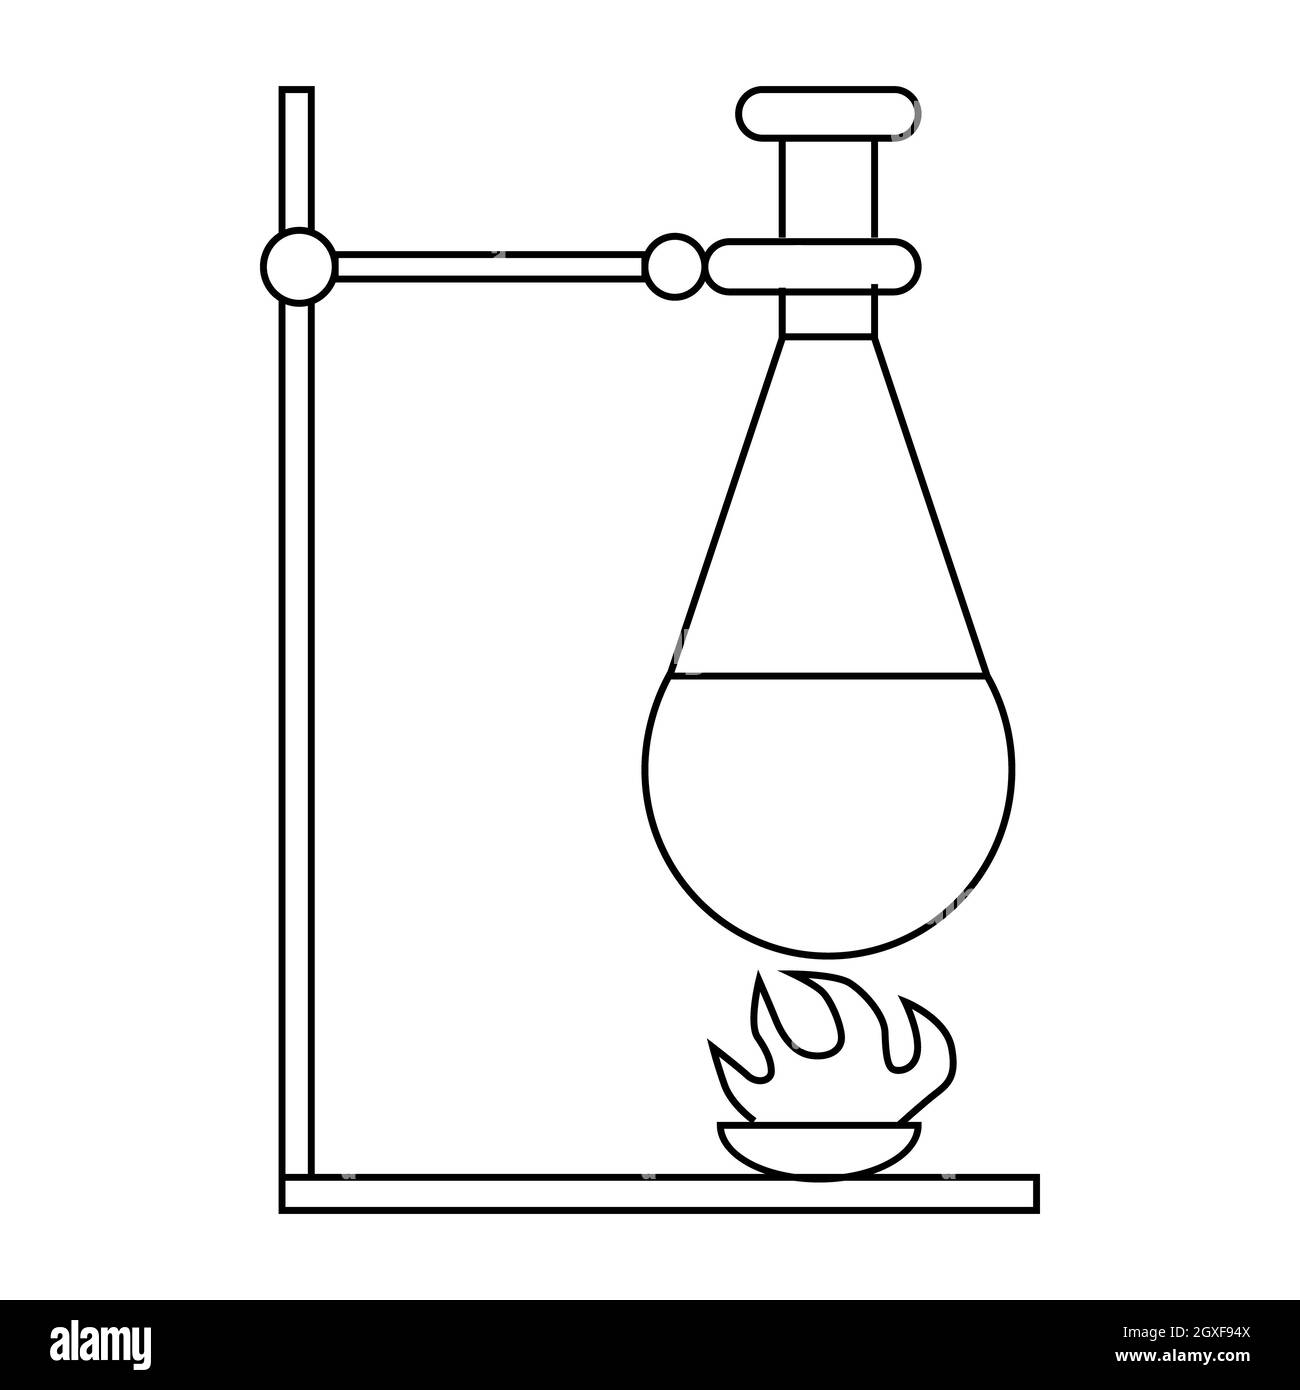 Retort stand, bunsen burner and test flask icon in outline style on a white background Stock Photo